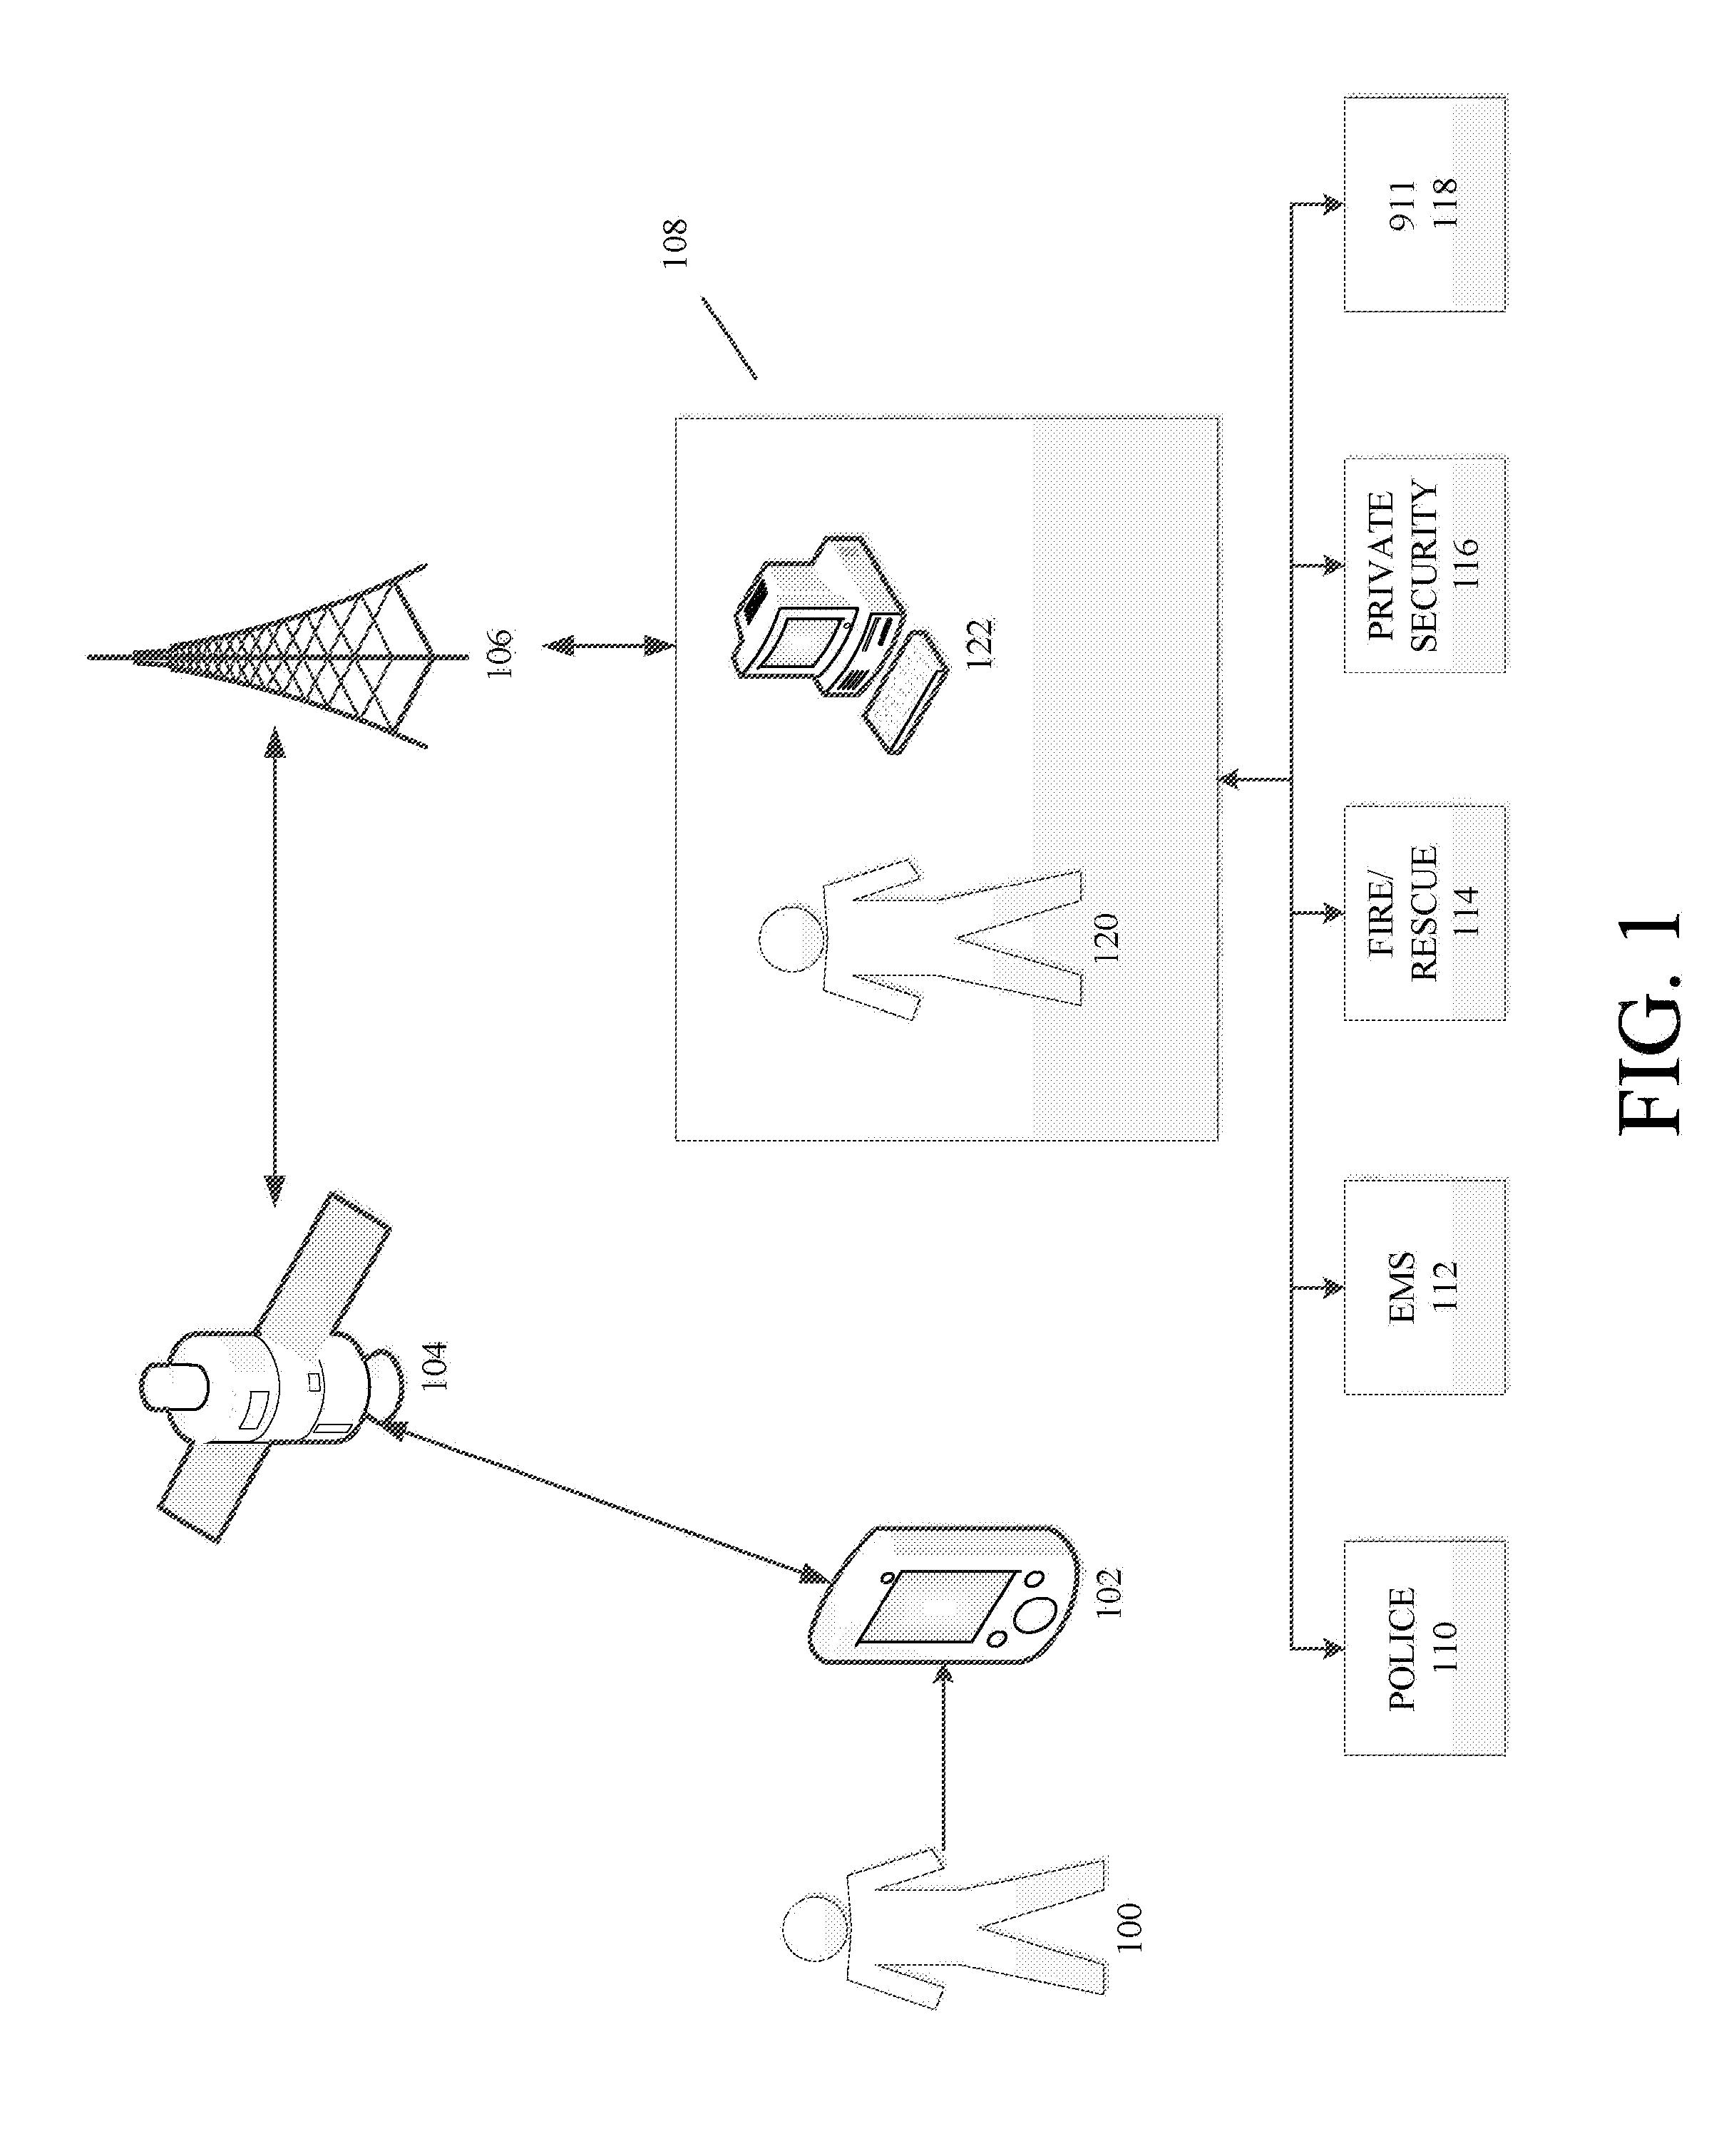 Methods and systems for providing multiple coordinated safety responses